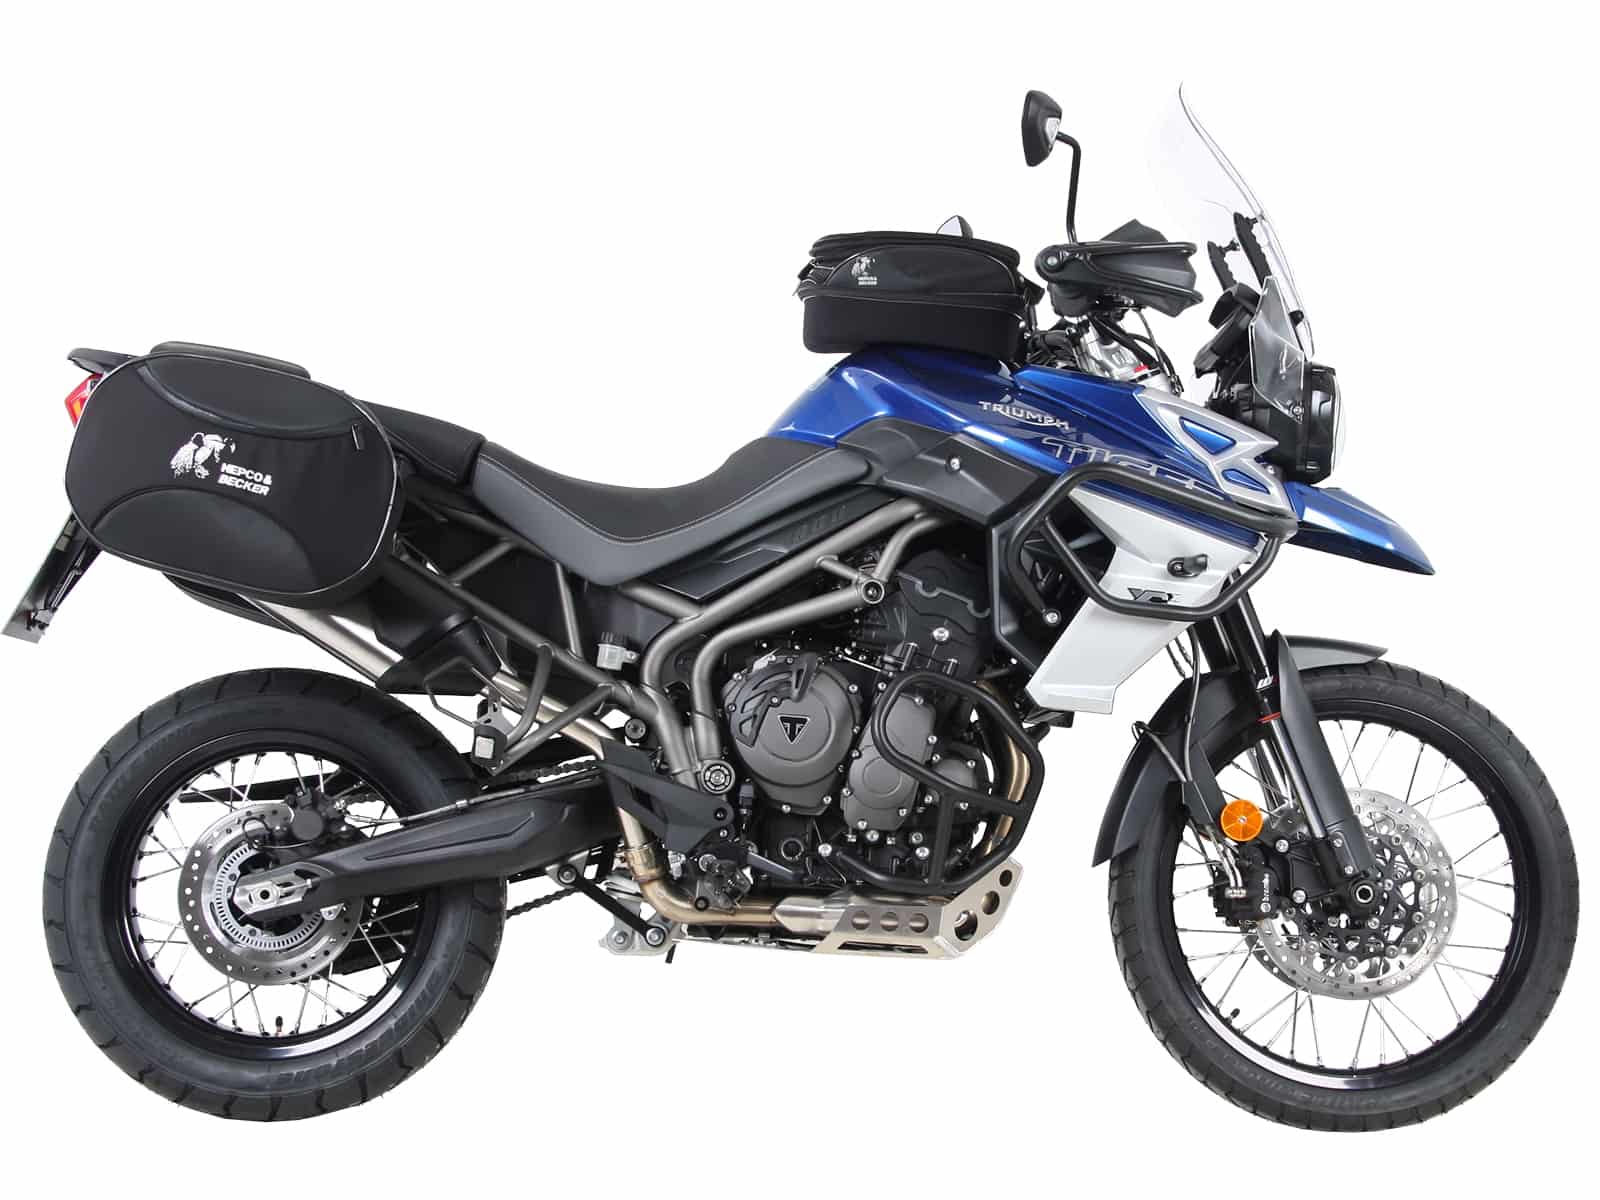 C-Bow sidecarrier for Triumph Tiger 800 XR / XRX / XRT / XC / XCX / XCA (2018-)